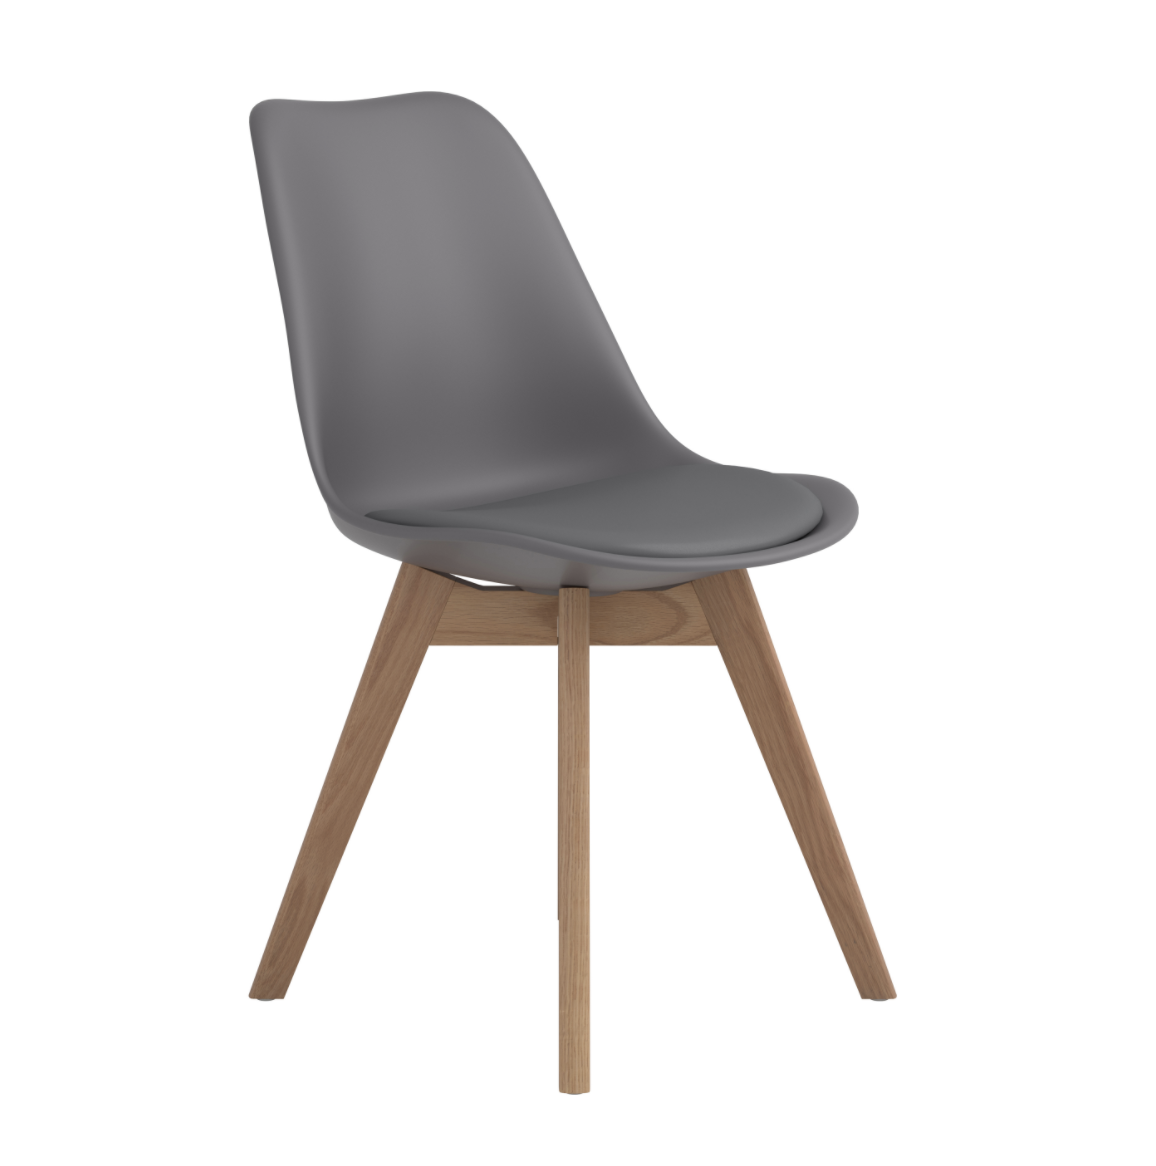 12 Month Rental Plan |  Breckenridge Dining Chair (x1) | From $20/mo